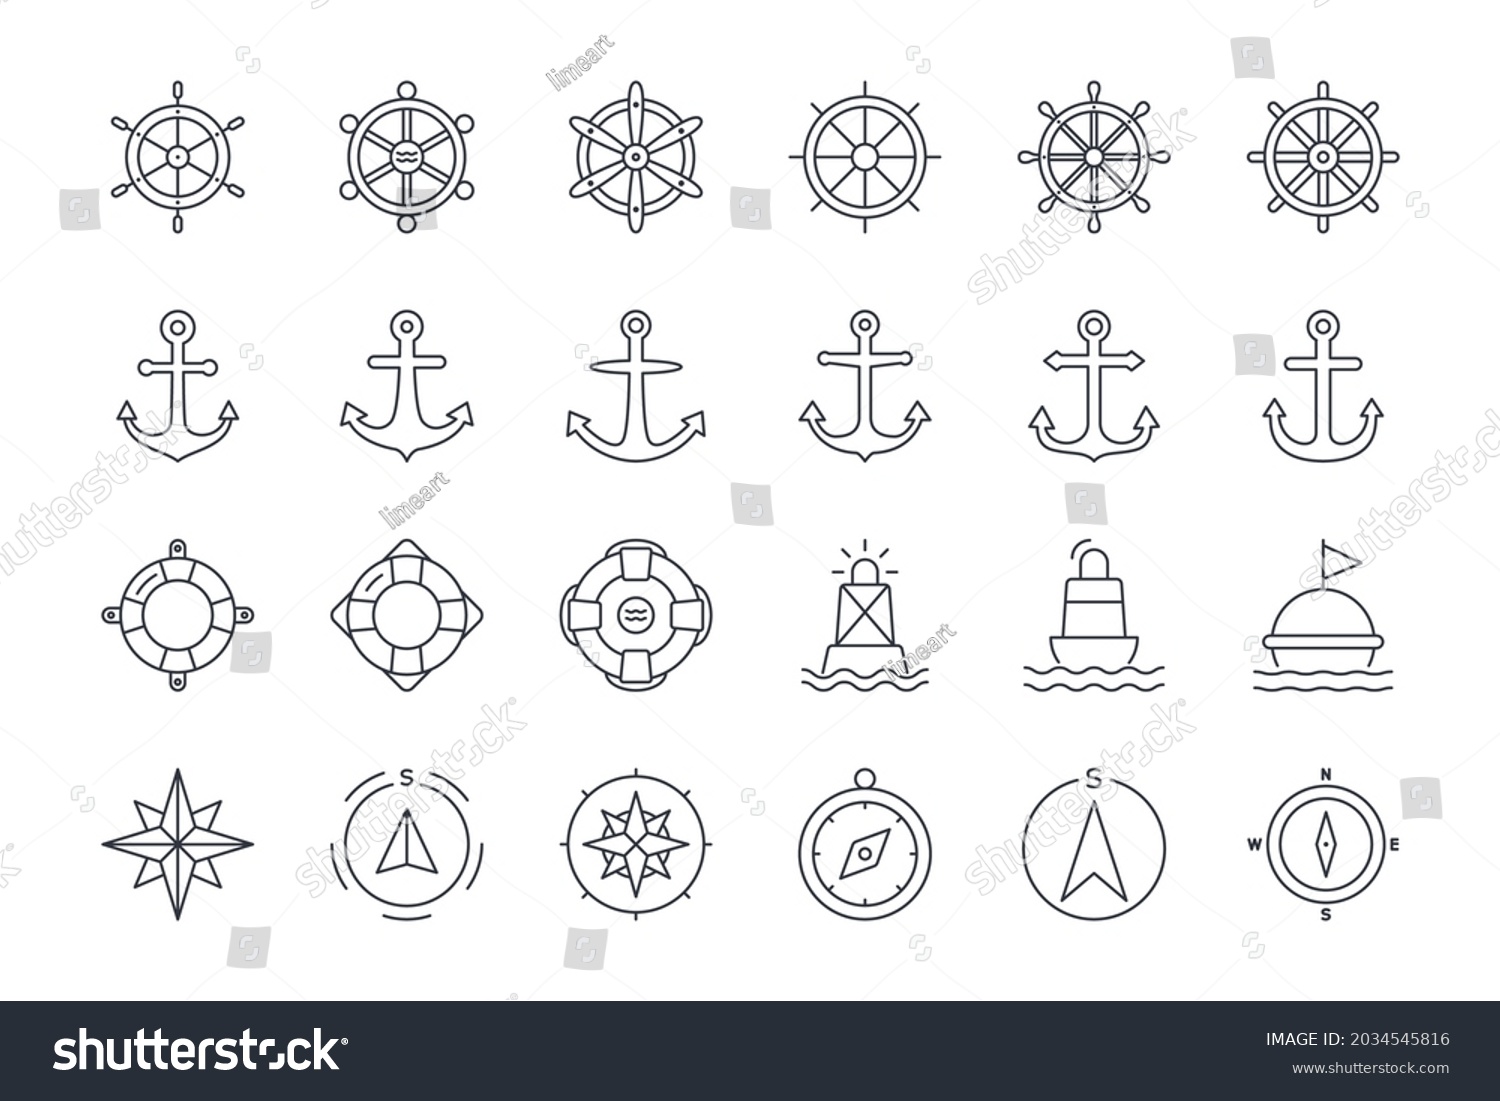 SVG of Vector icons of ship steering wheel, anchor, lifebuoy and buoy, compass, wind pose. Editable stroke. Set of linear nautical icons svg